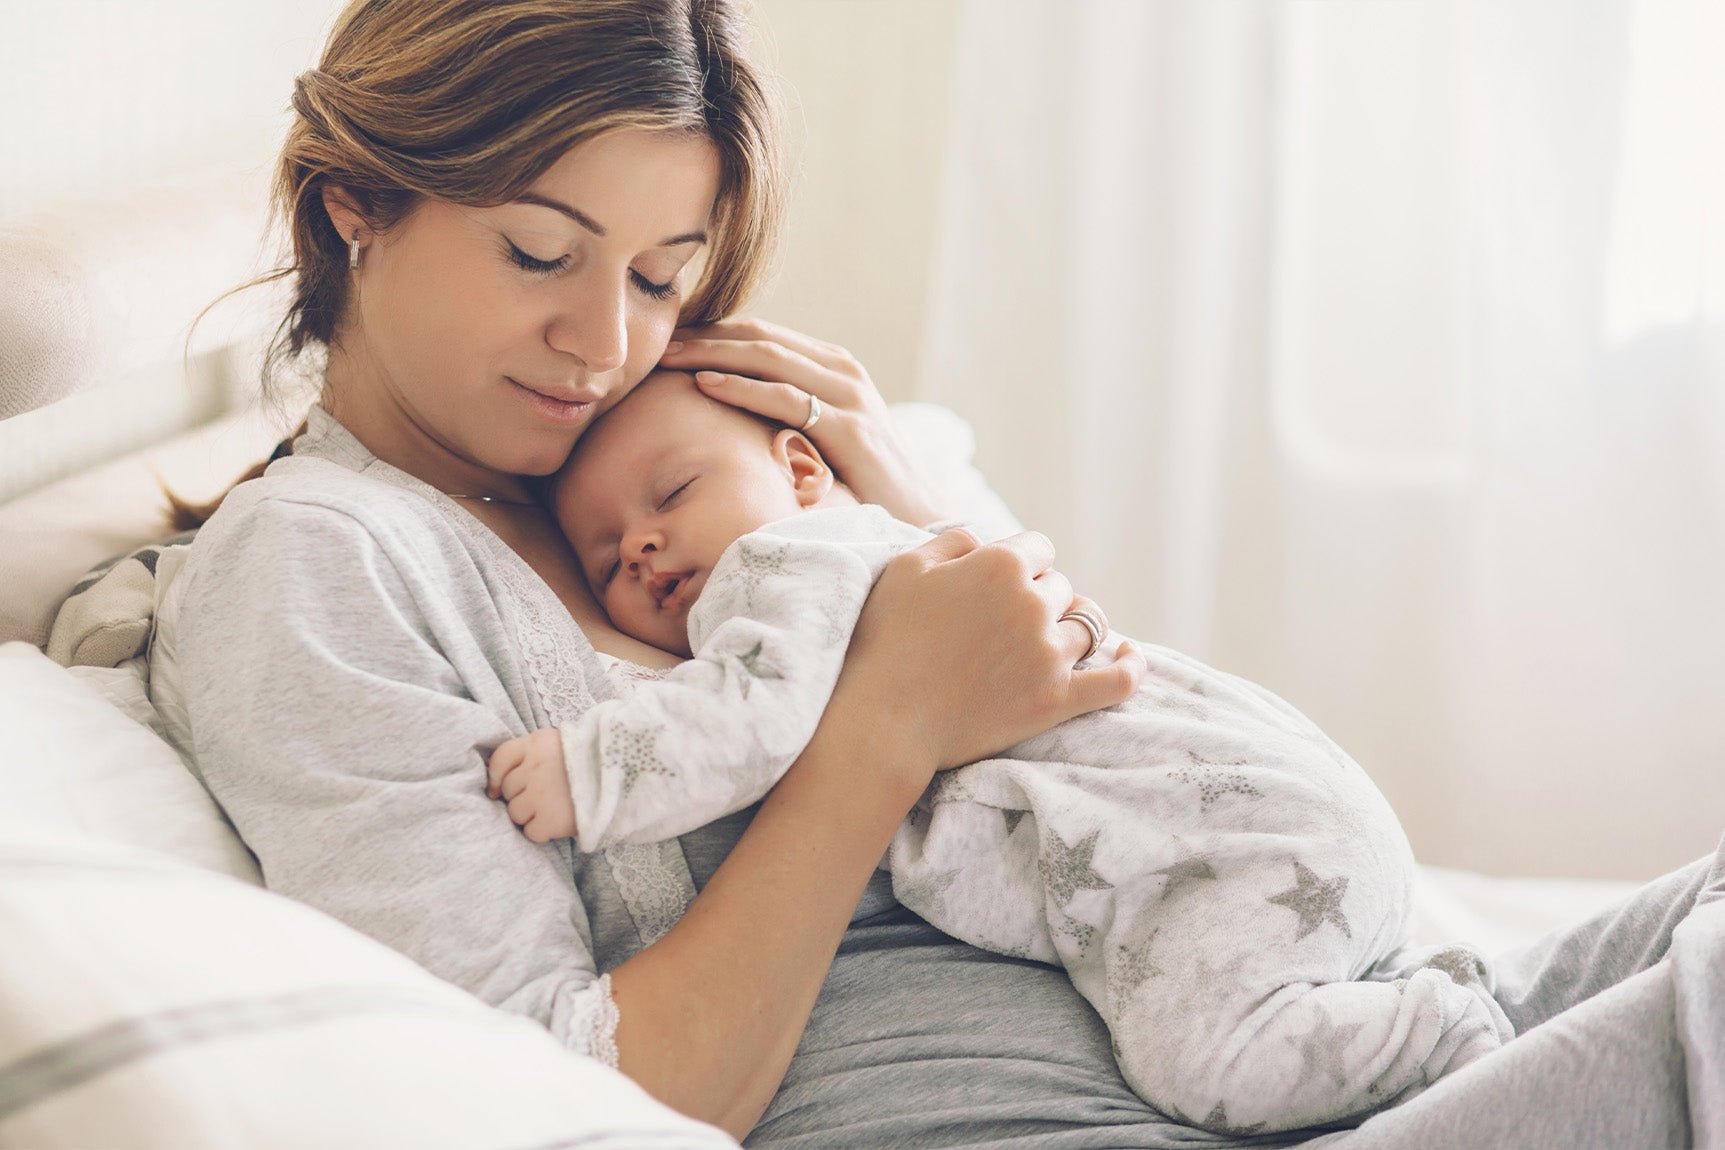 4 Postpartum Care Tips All New Mums Should Know - The Collagen Co.